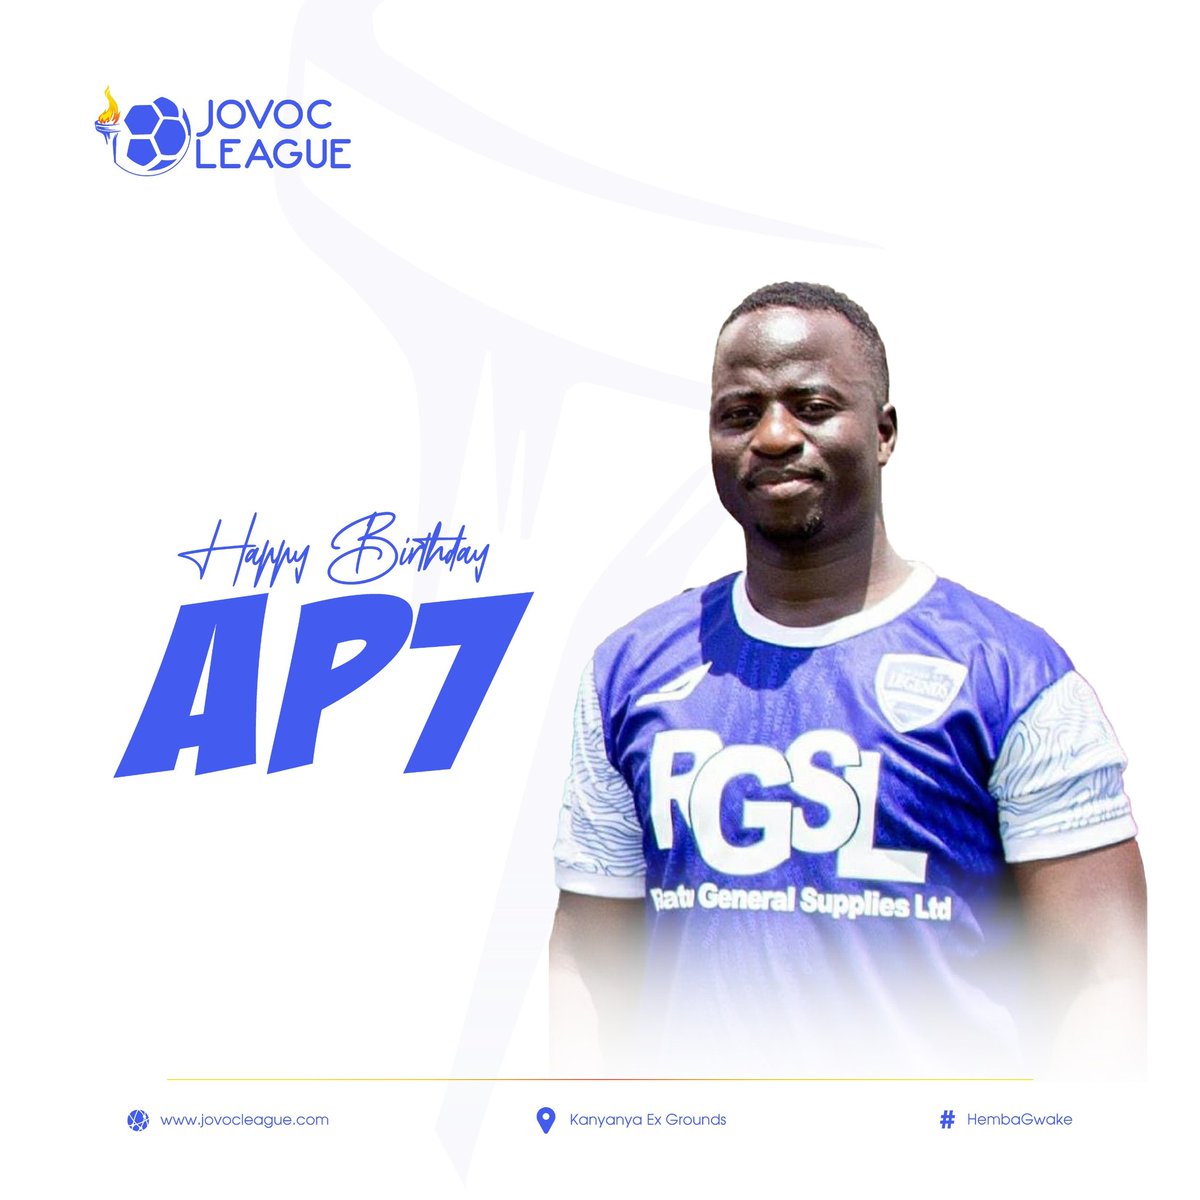 Wishing you @asingye_patrick a birthday filled with joy, good health, and countless more to cherish! #TogetherStronger✊